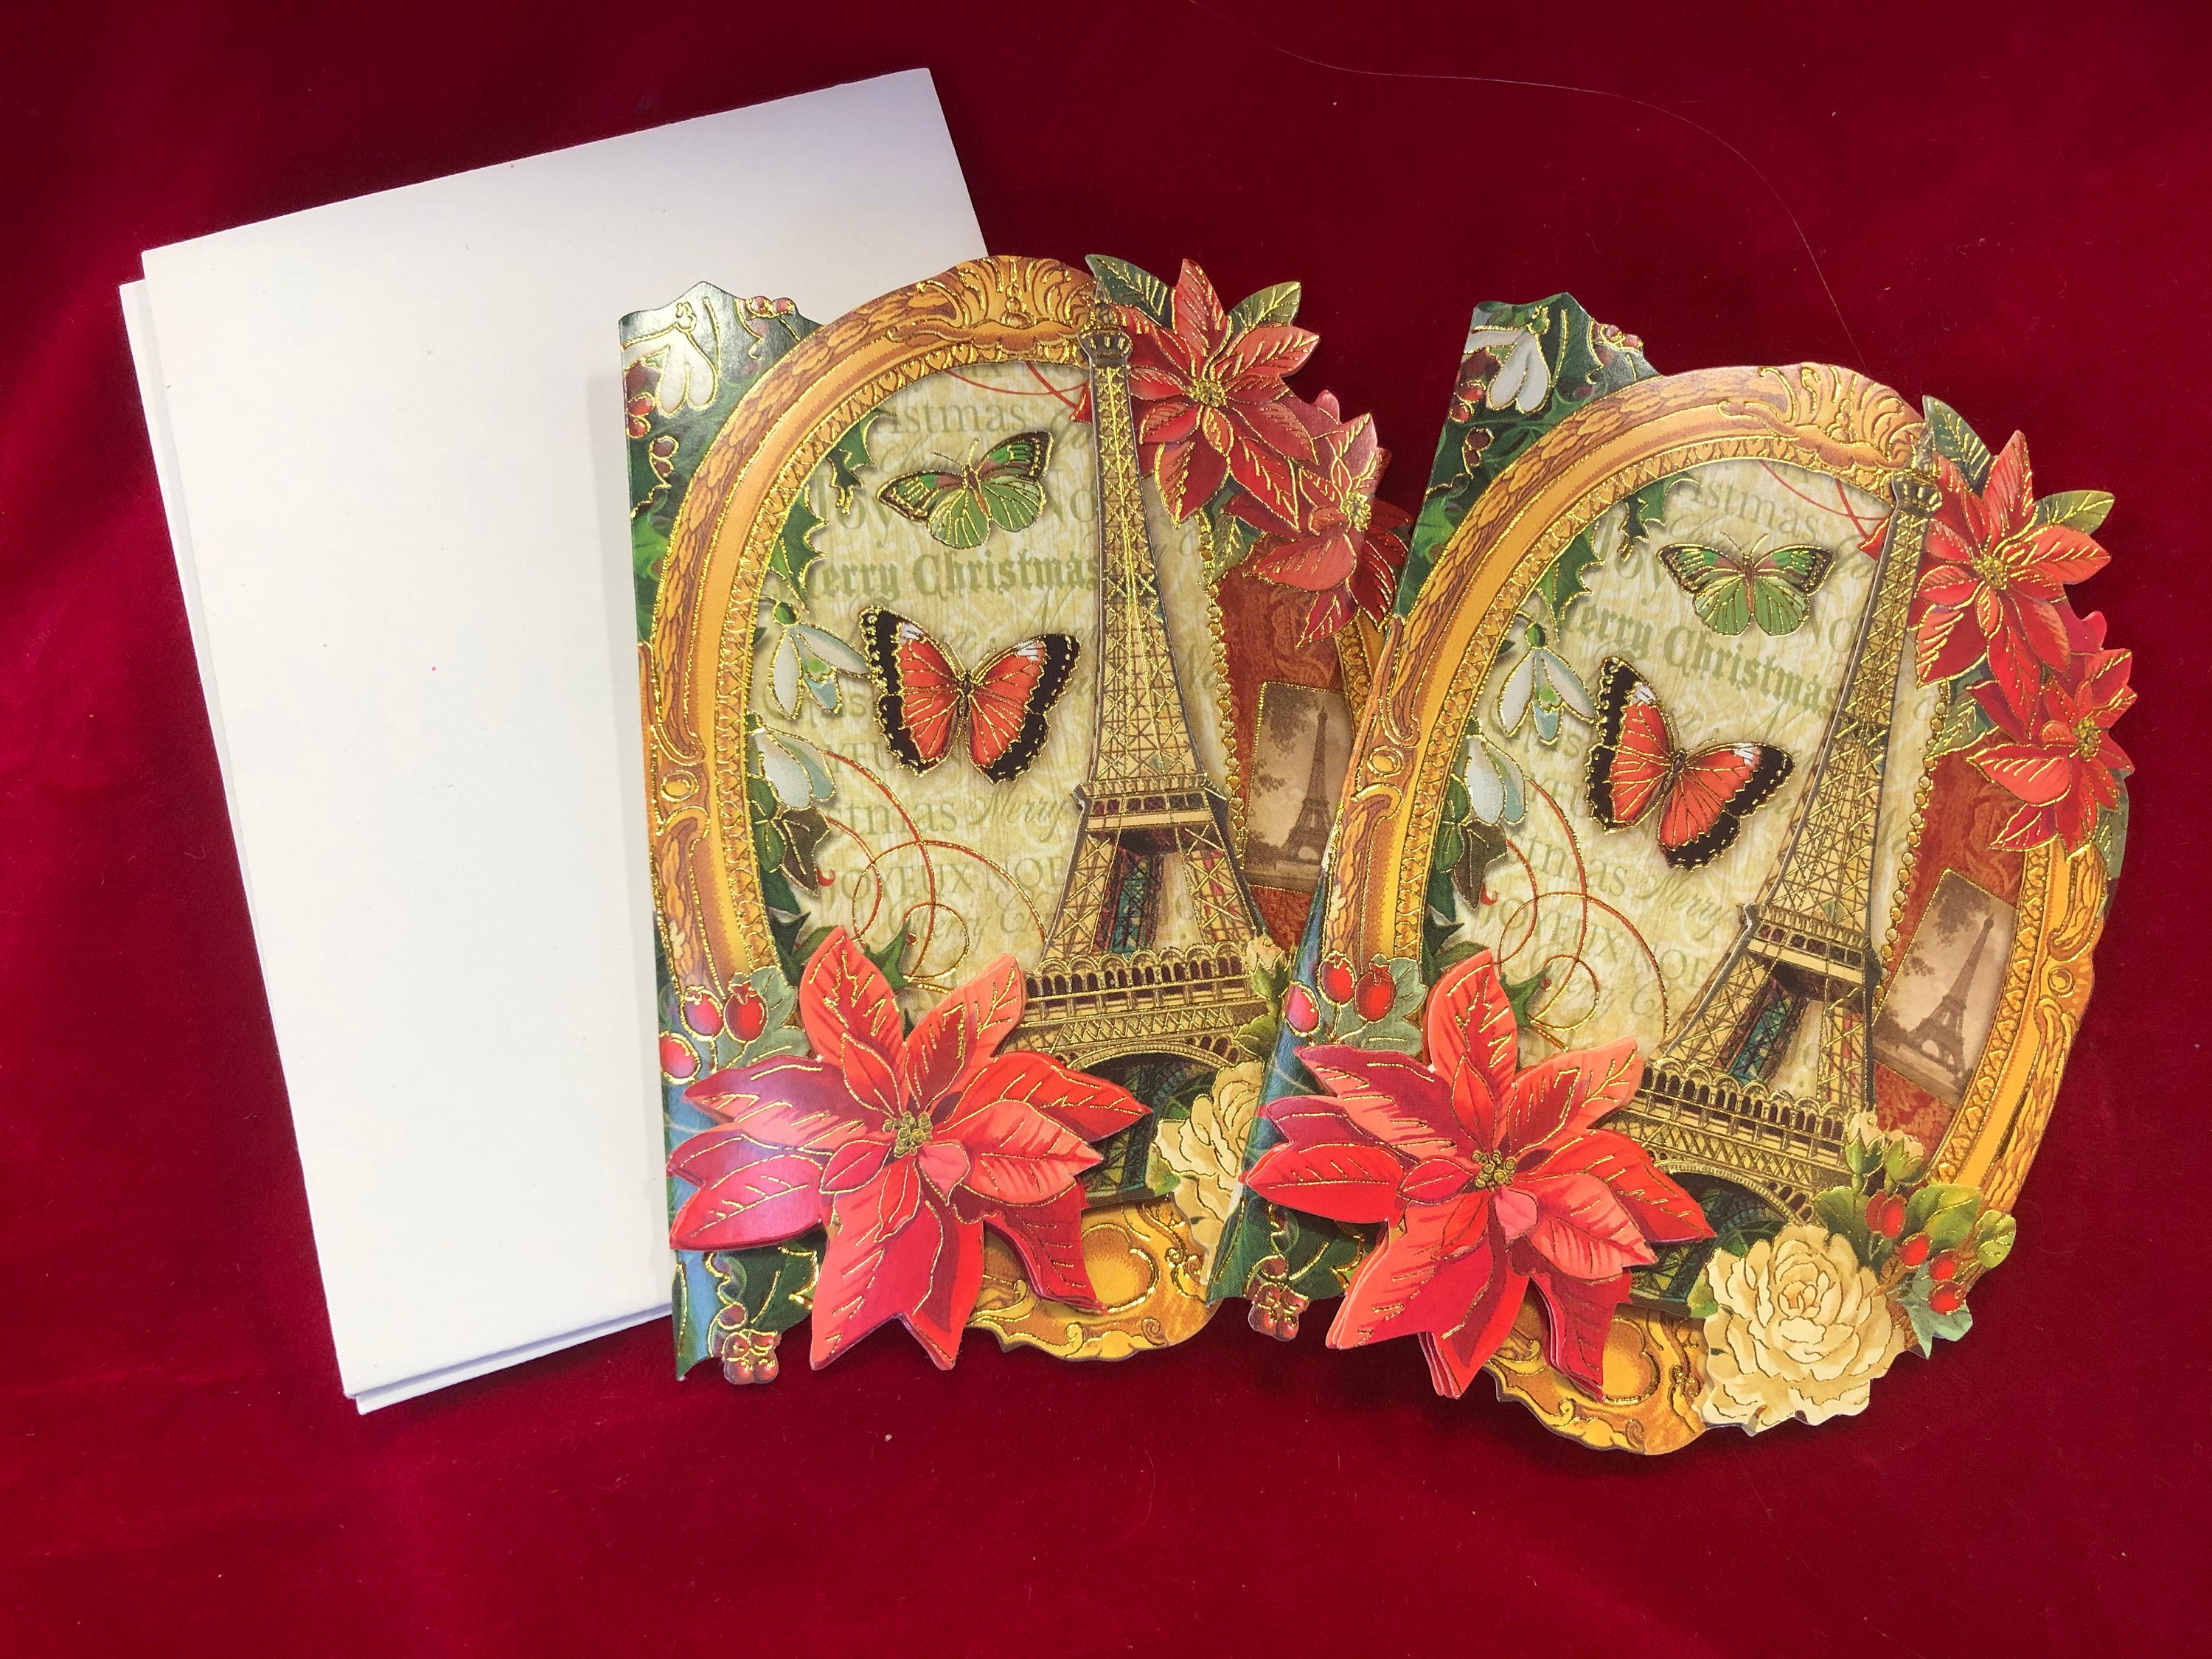 12 Victorian XmasTree 3D Gold Embellished 5 X 7 Xmas Cards More! PUNCH STUDIO 